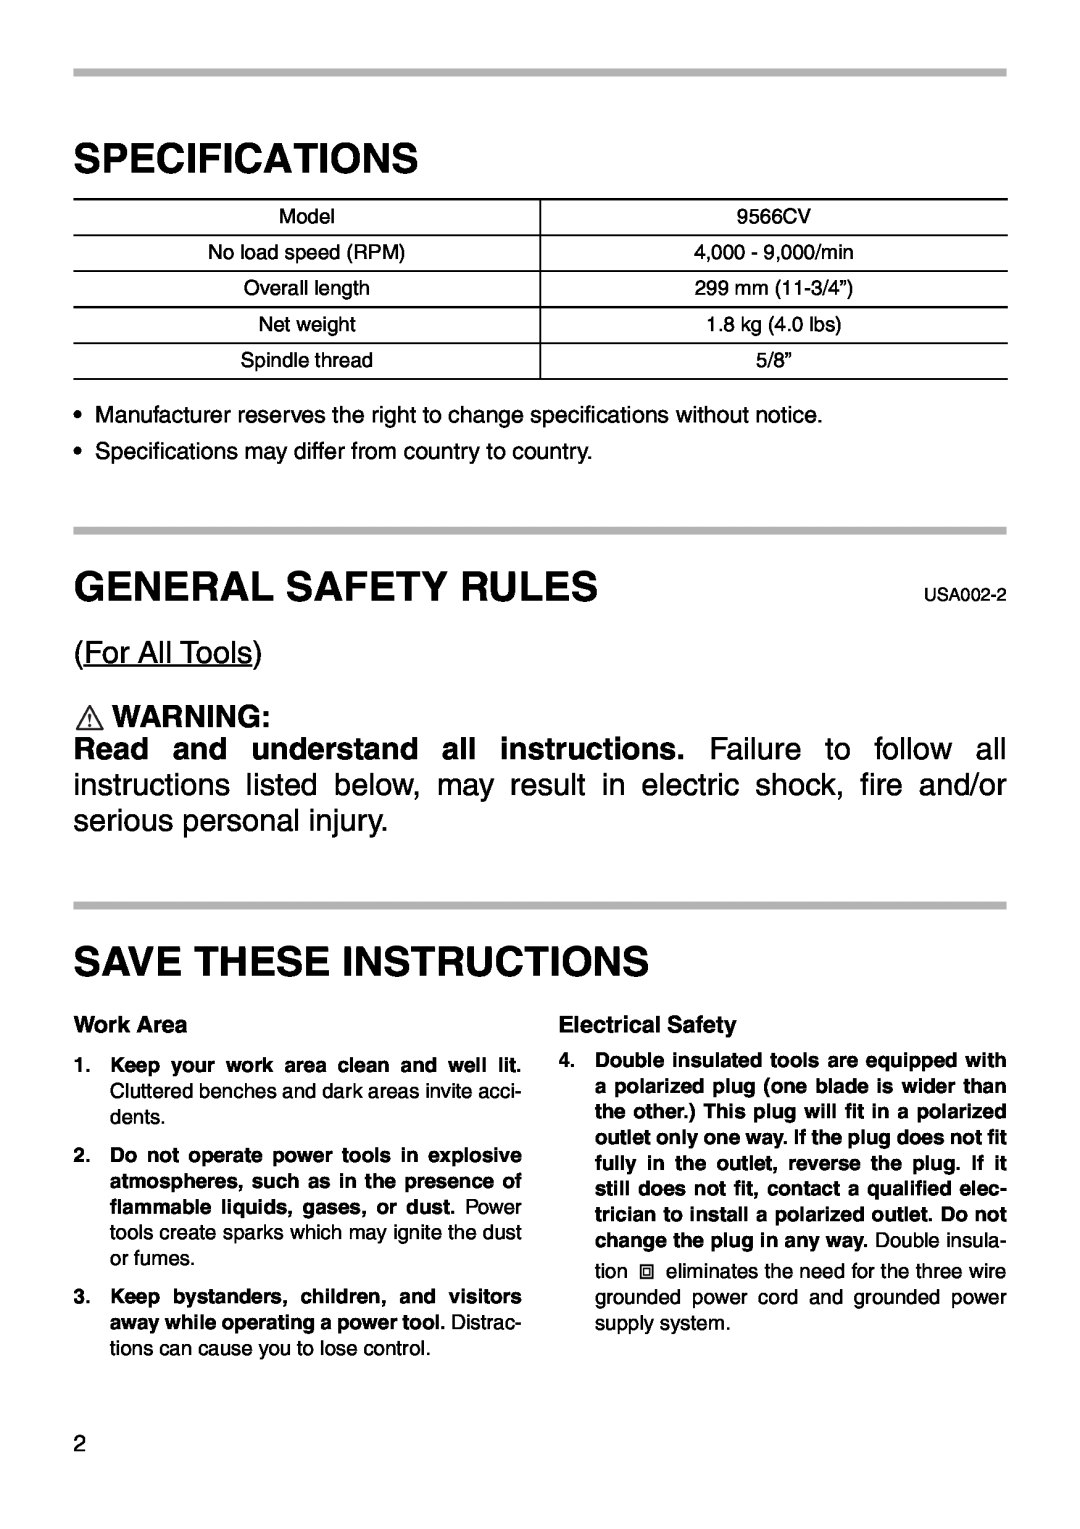 Makita 9566CV Specifications, General Safety Rules, Save These Instructions, For All Tools, Work Area, Electrical Safety 